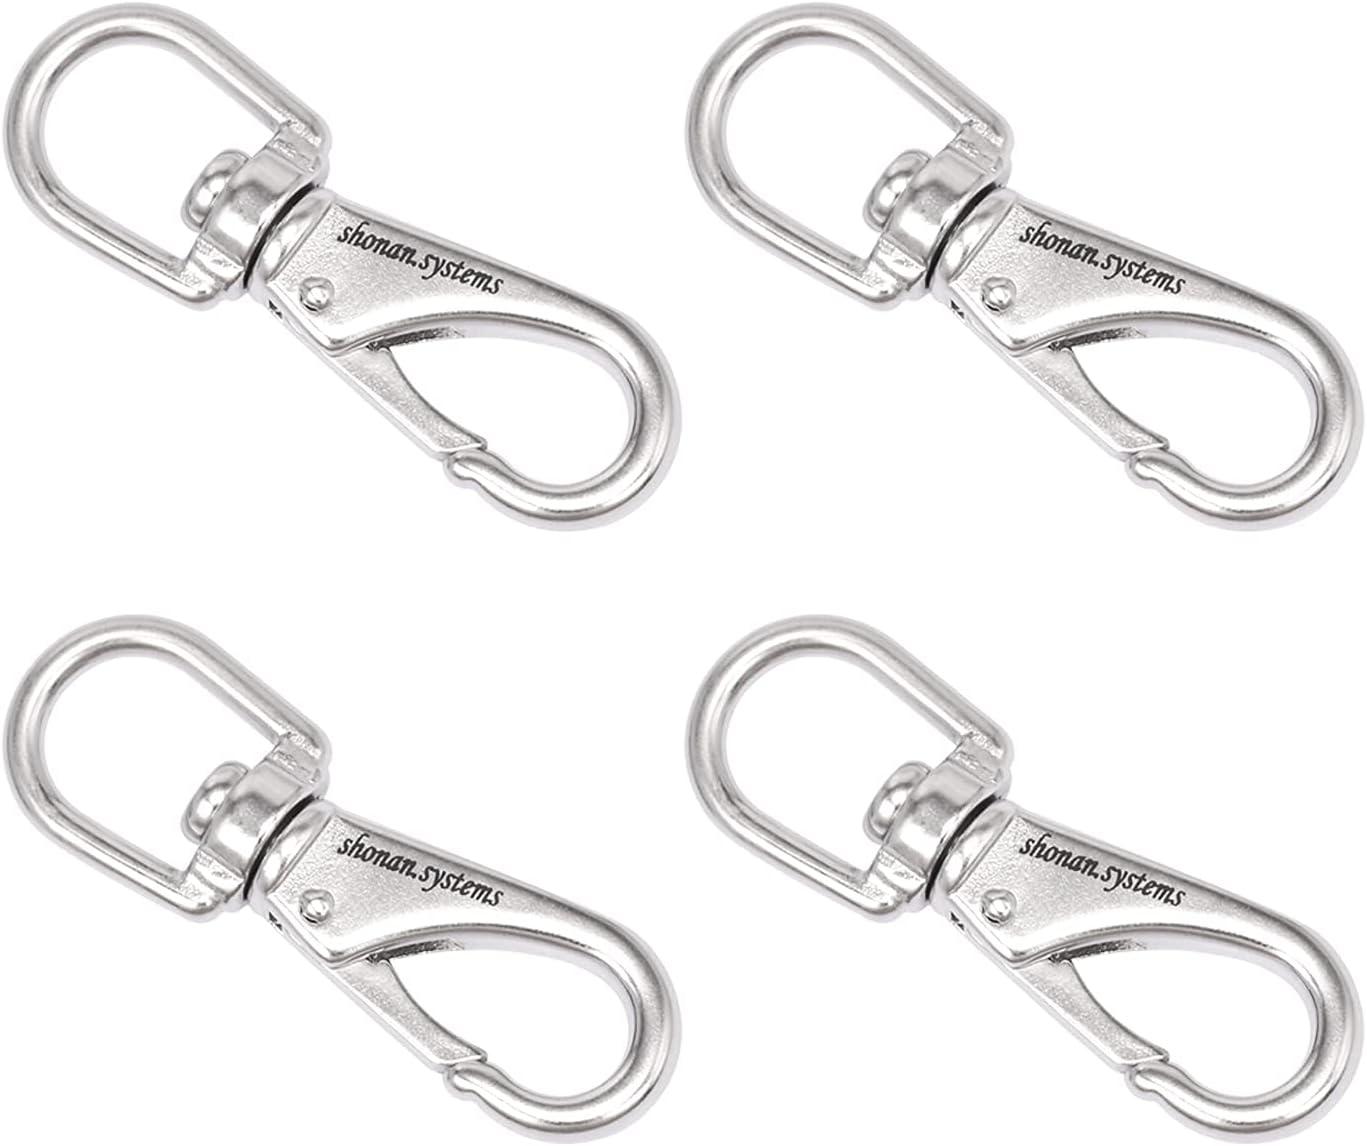 SHONAN Stainless Steel Flag Clips for Flagpole Rope- 4 Pack 3.5 Inch Swivel  Snap Hook Flag Pole Clips, Diving Clips Spring Hooks for Dog leashes,  Keychains, Boat Ropes, Bird Feeders